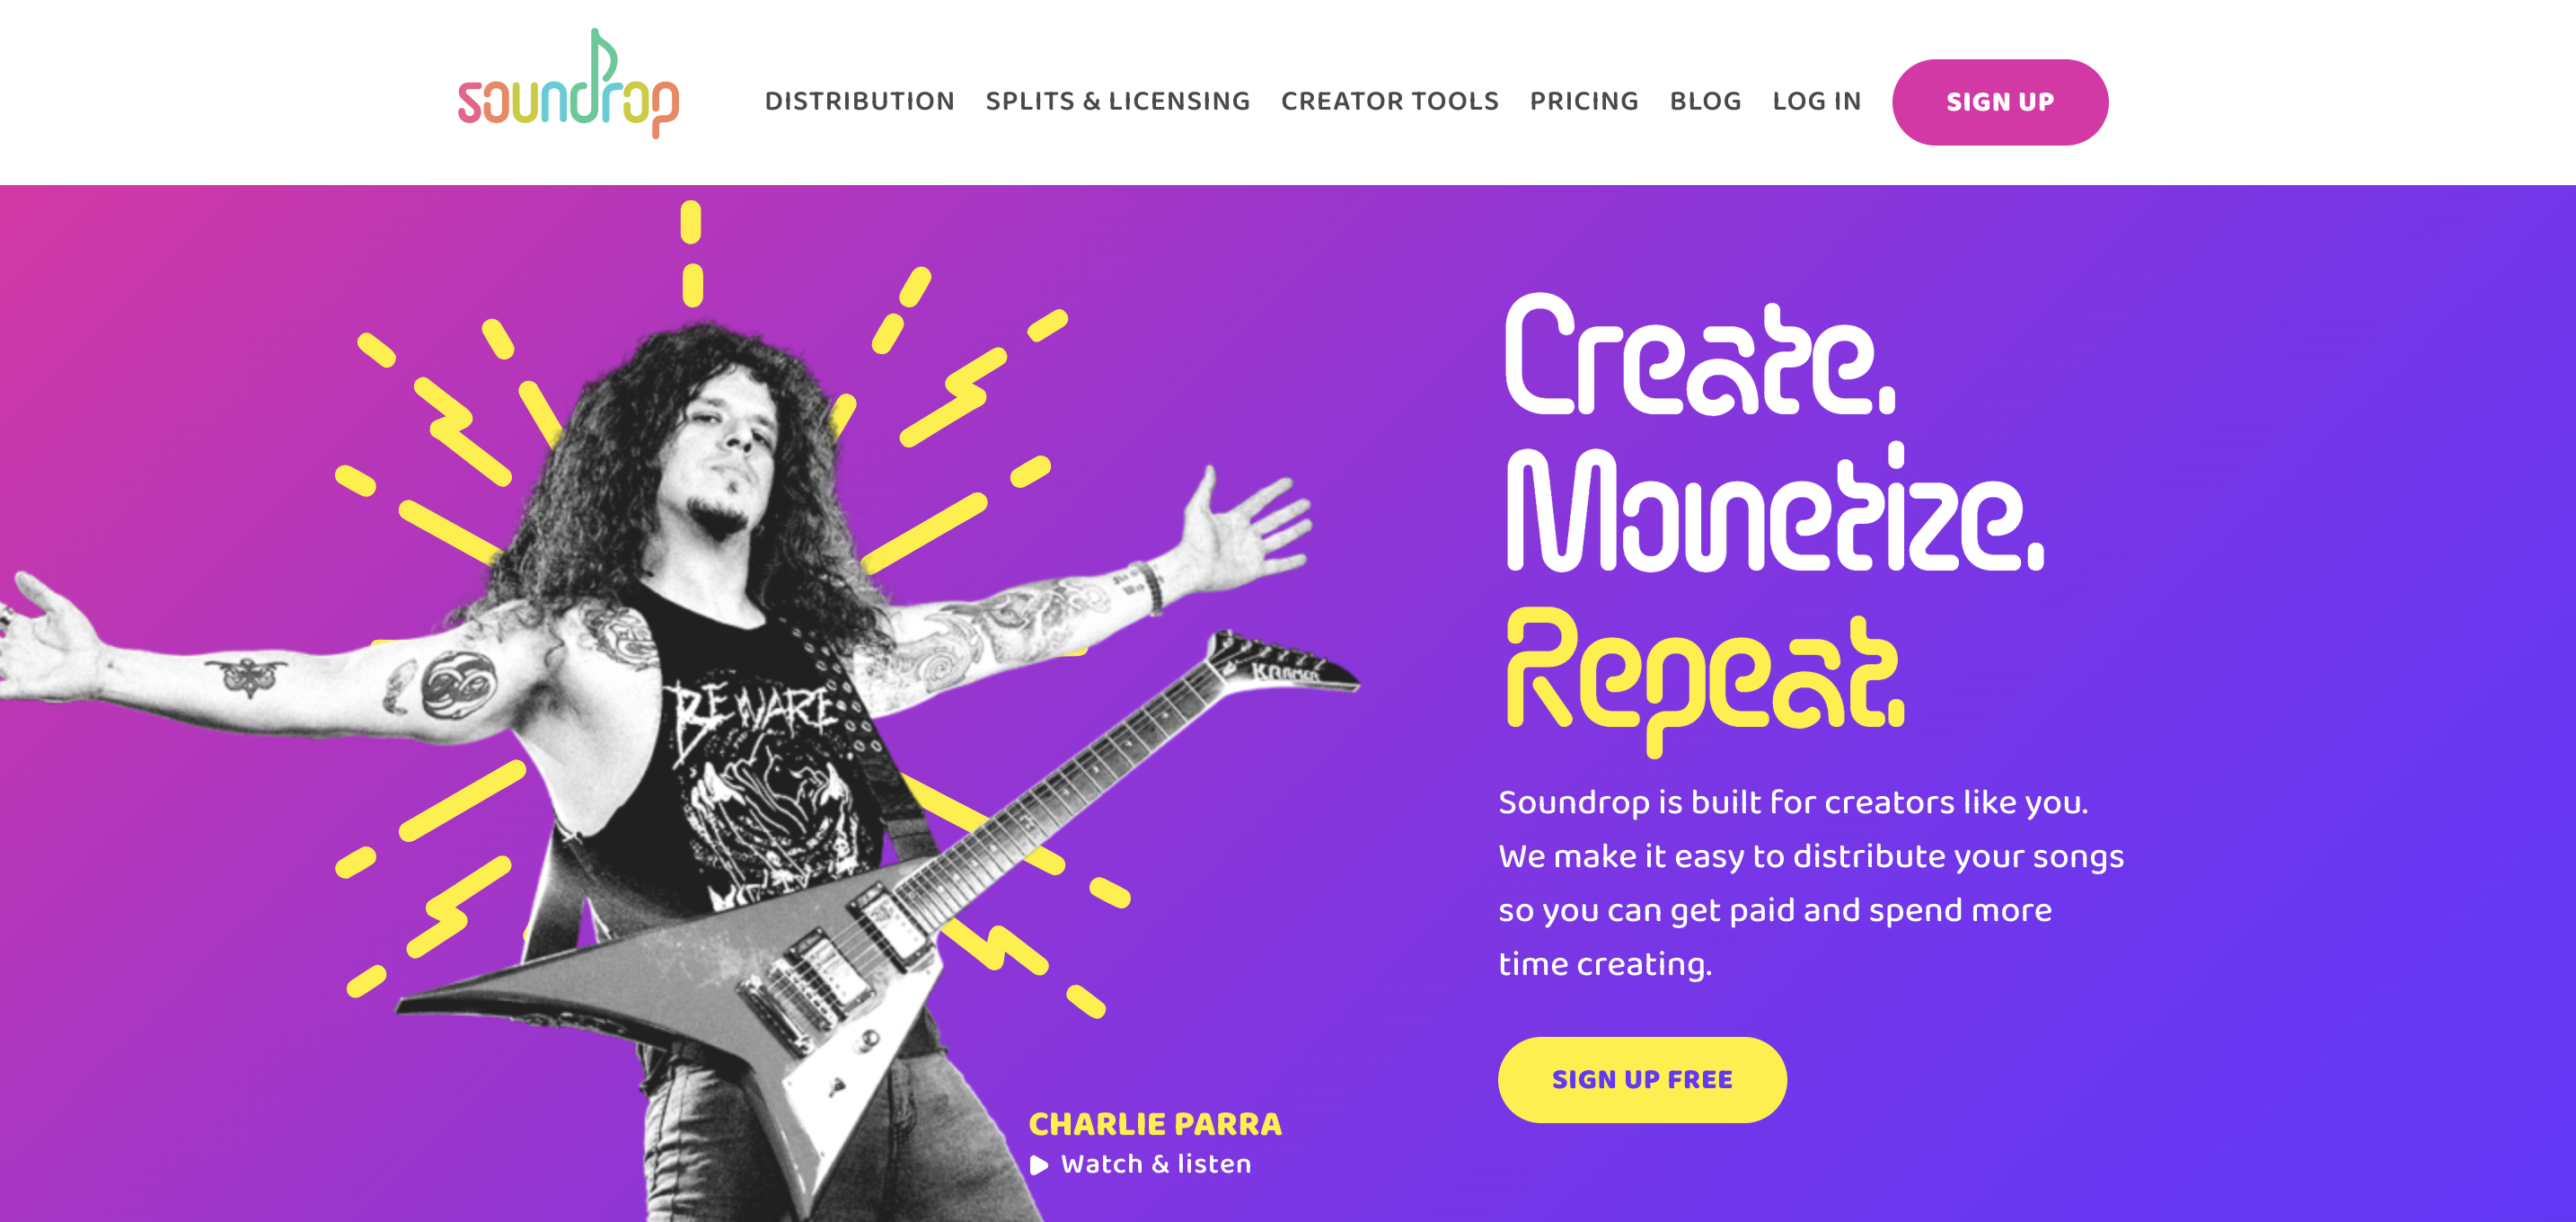 Screenshot of the website Soundrop, showing a Rock musician with a guitar standing with arms wide open on a website promoting music creation, distribution services, and opportunities to get paid to write song lyrics.